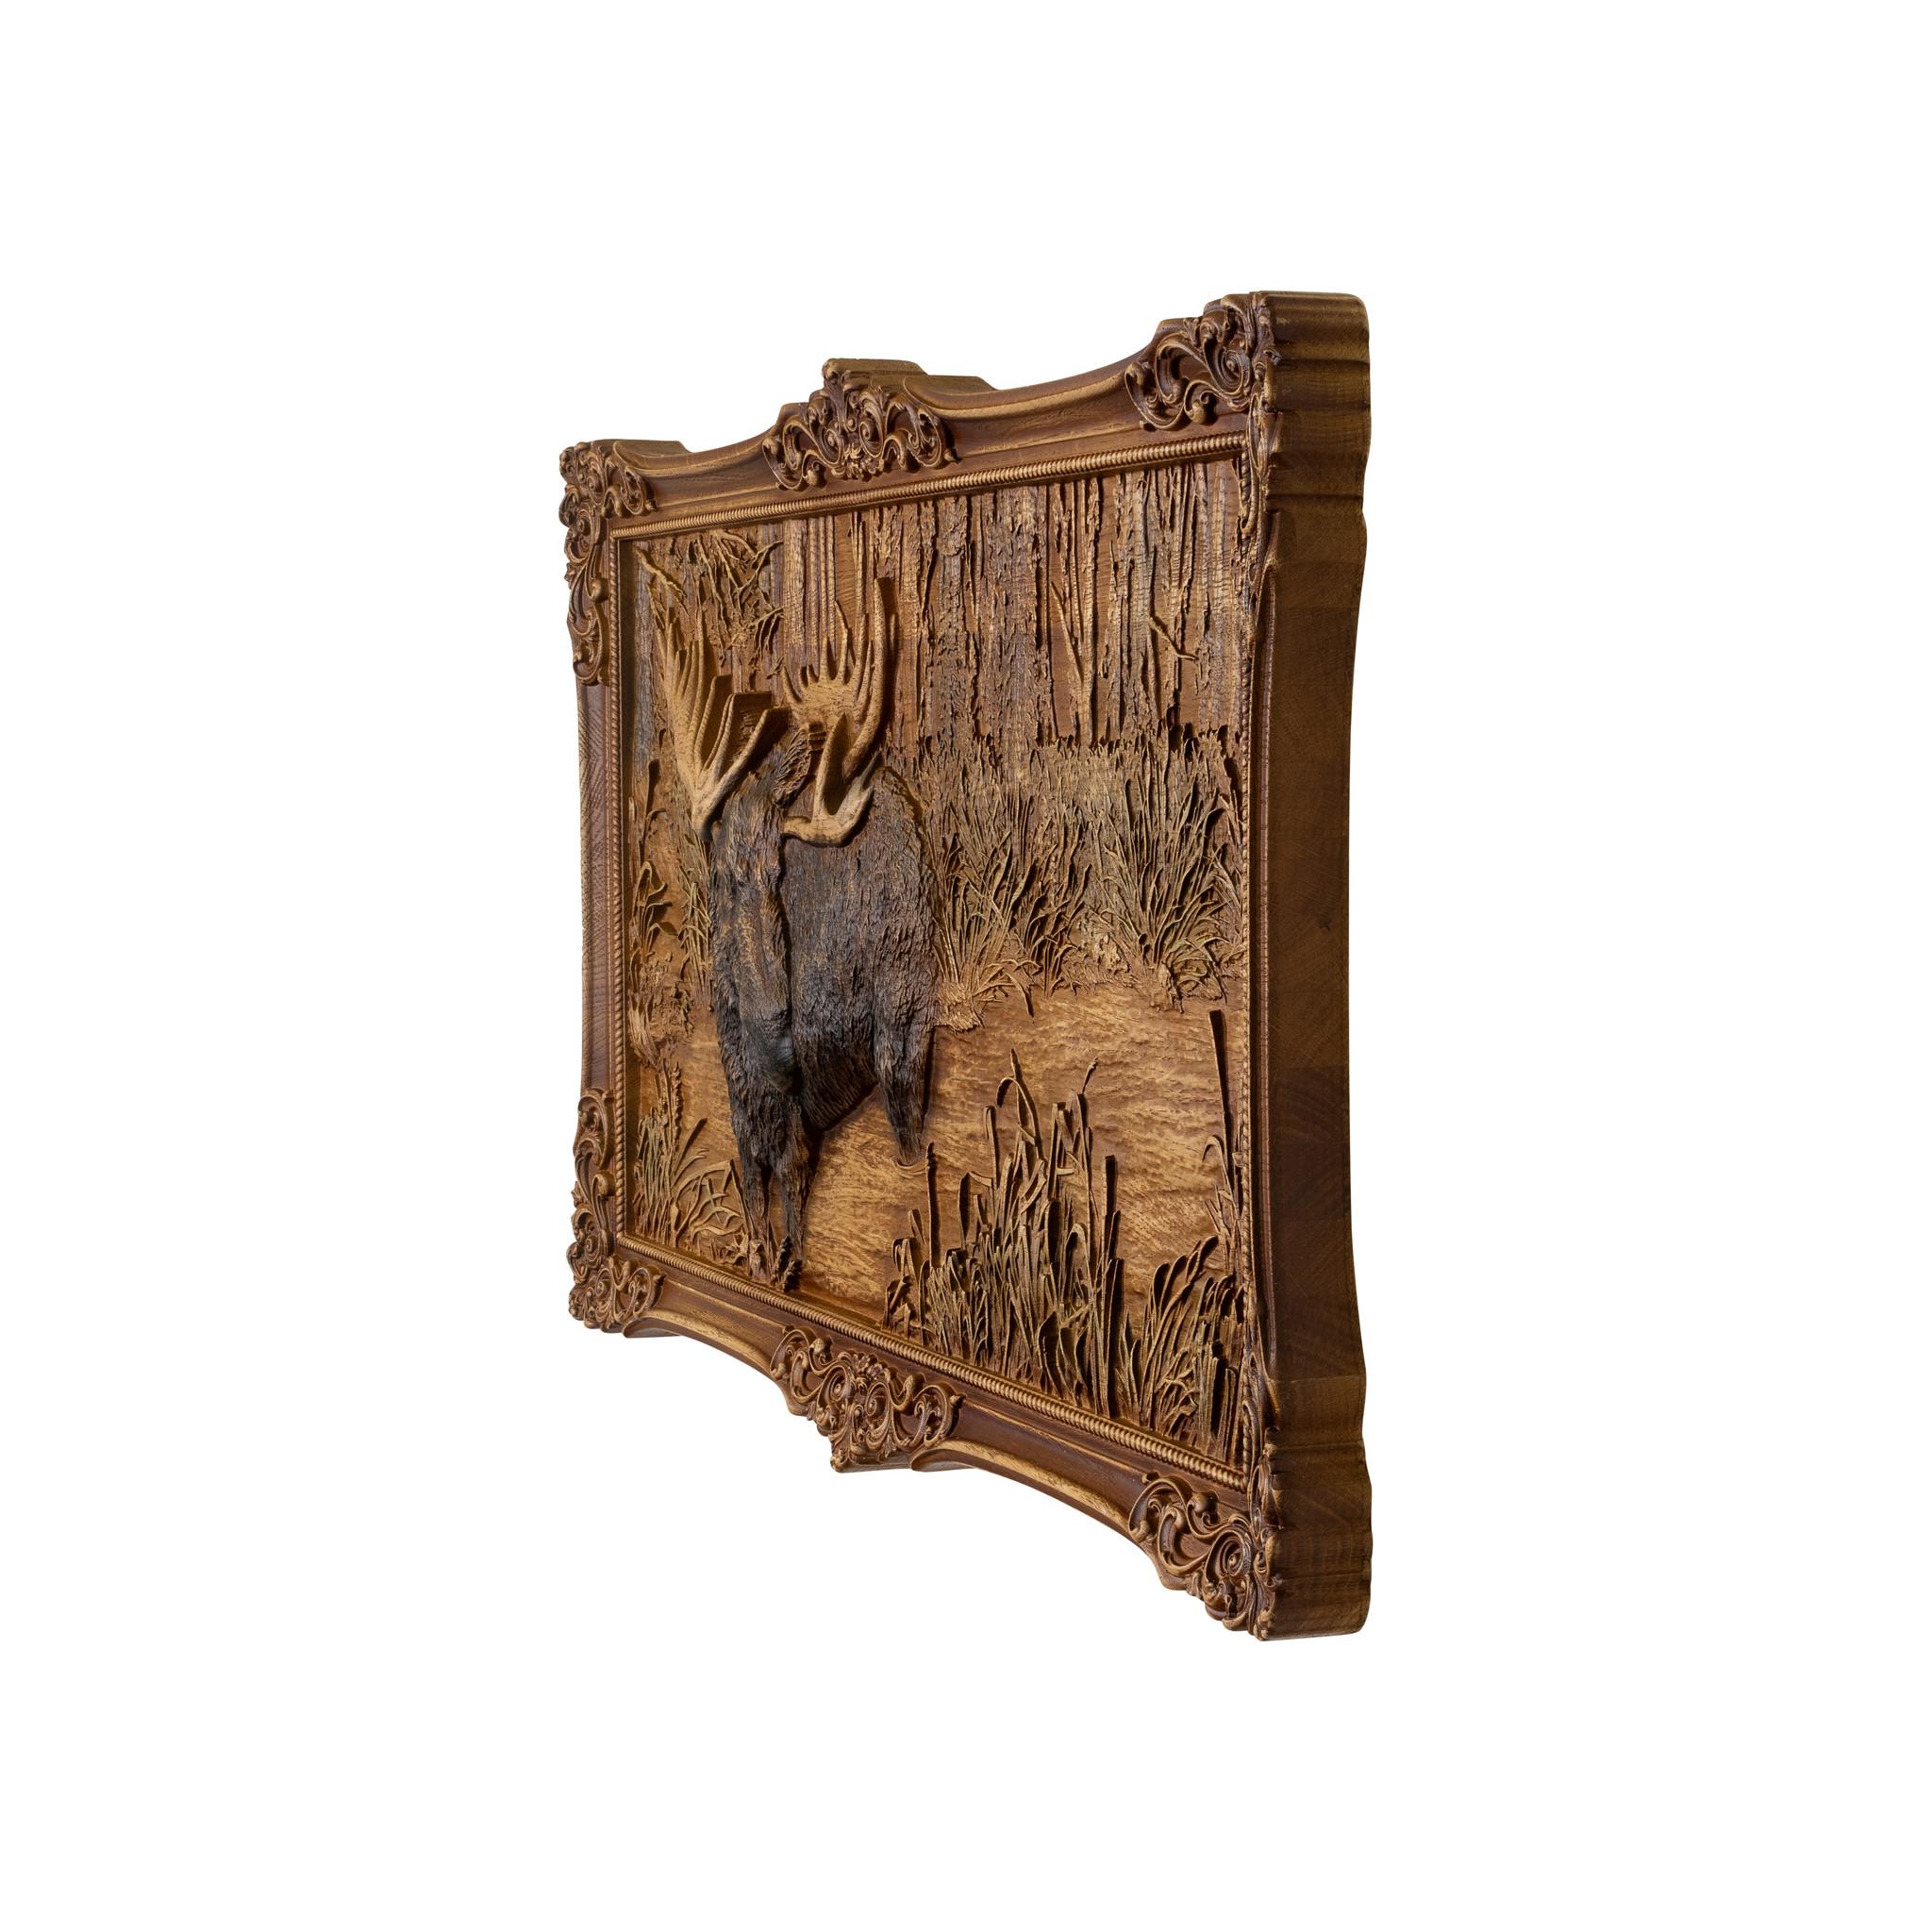 Intricately carved moose plaque of oak including integral frame. Very nice quality, beautiful detail and perfect for the lodge, cabin or rustic decor. Can possibly be made to order if requested and extended timeframe.

Period: Contemporary
Origin: